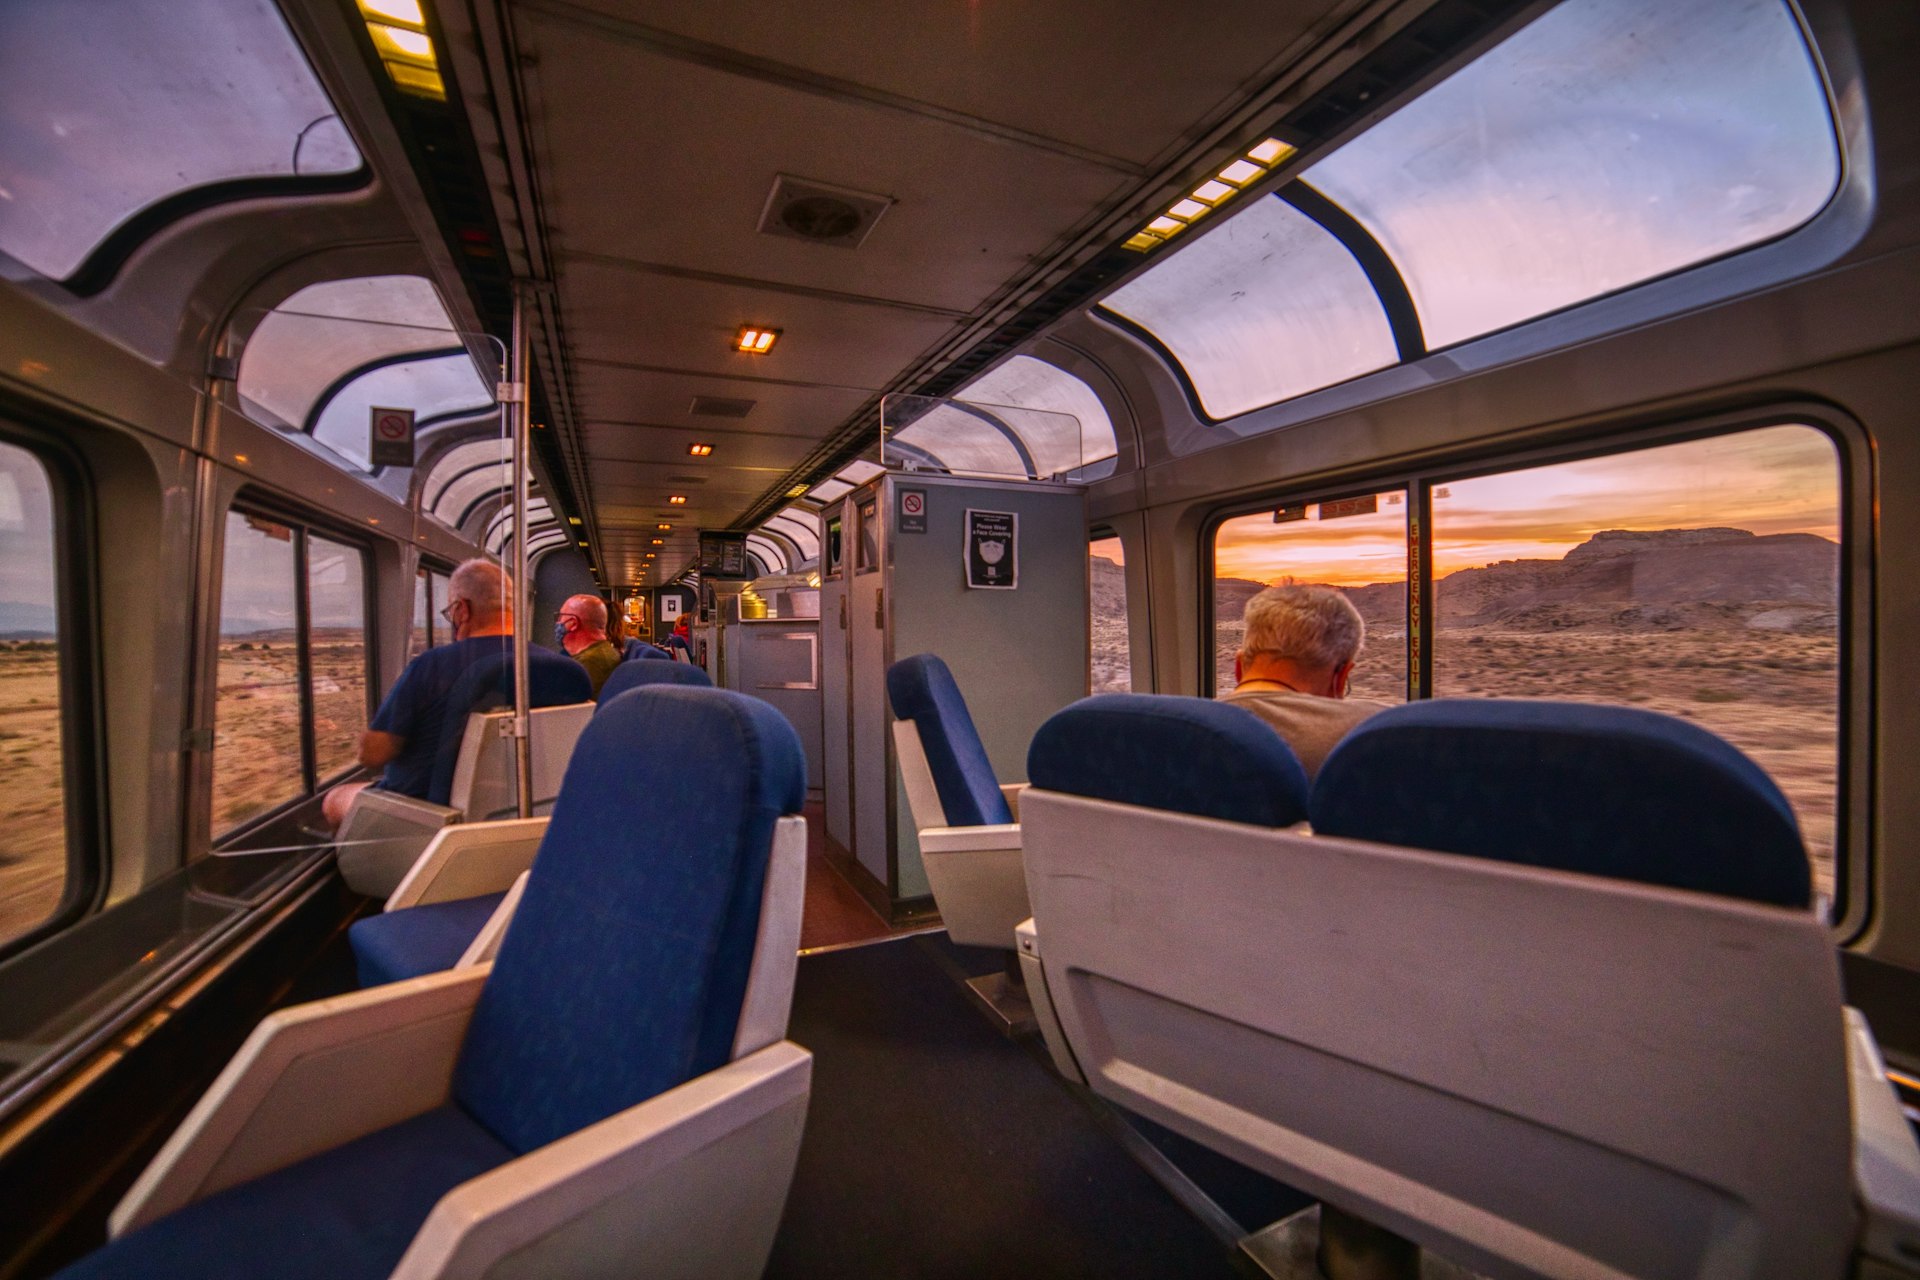 People sit in an observation train car looking out at the sunset on an Amtrak train, USA